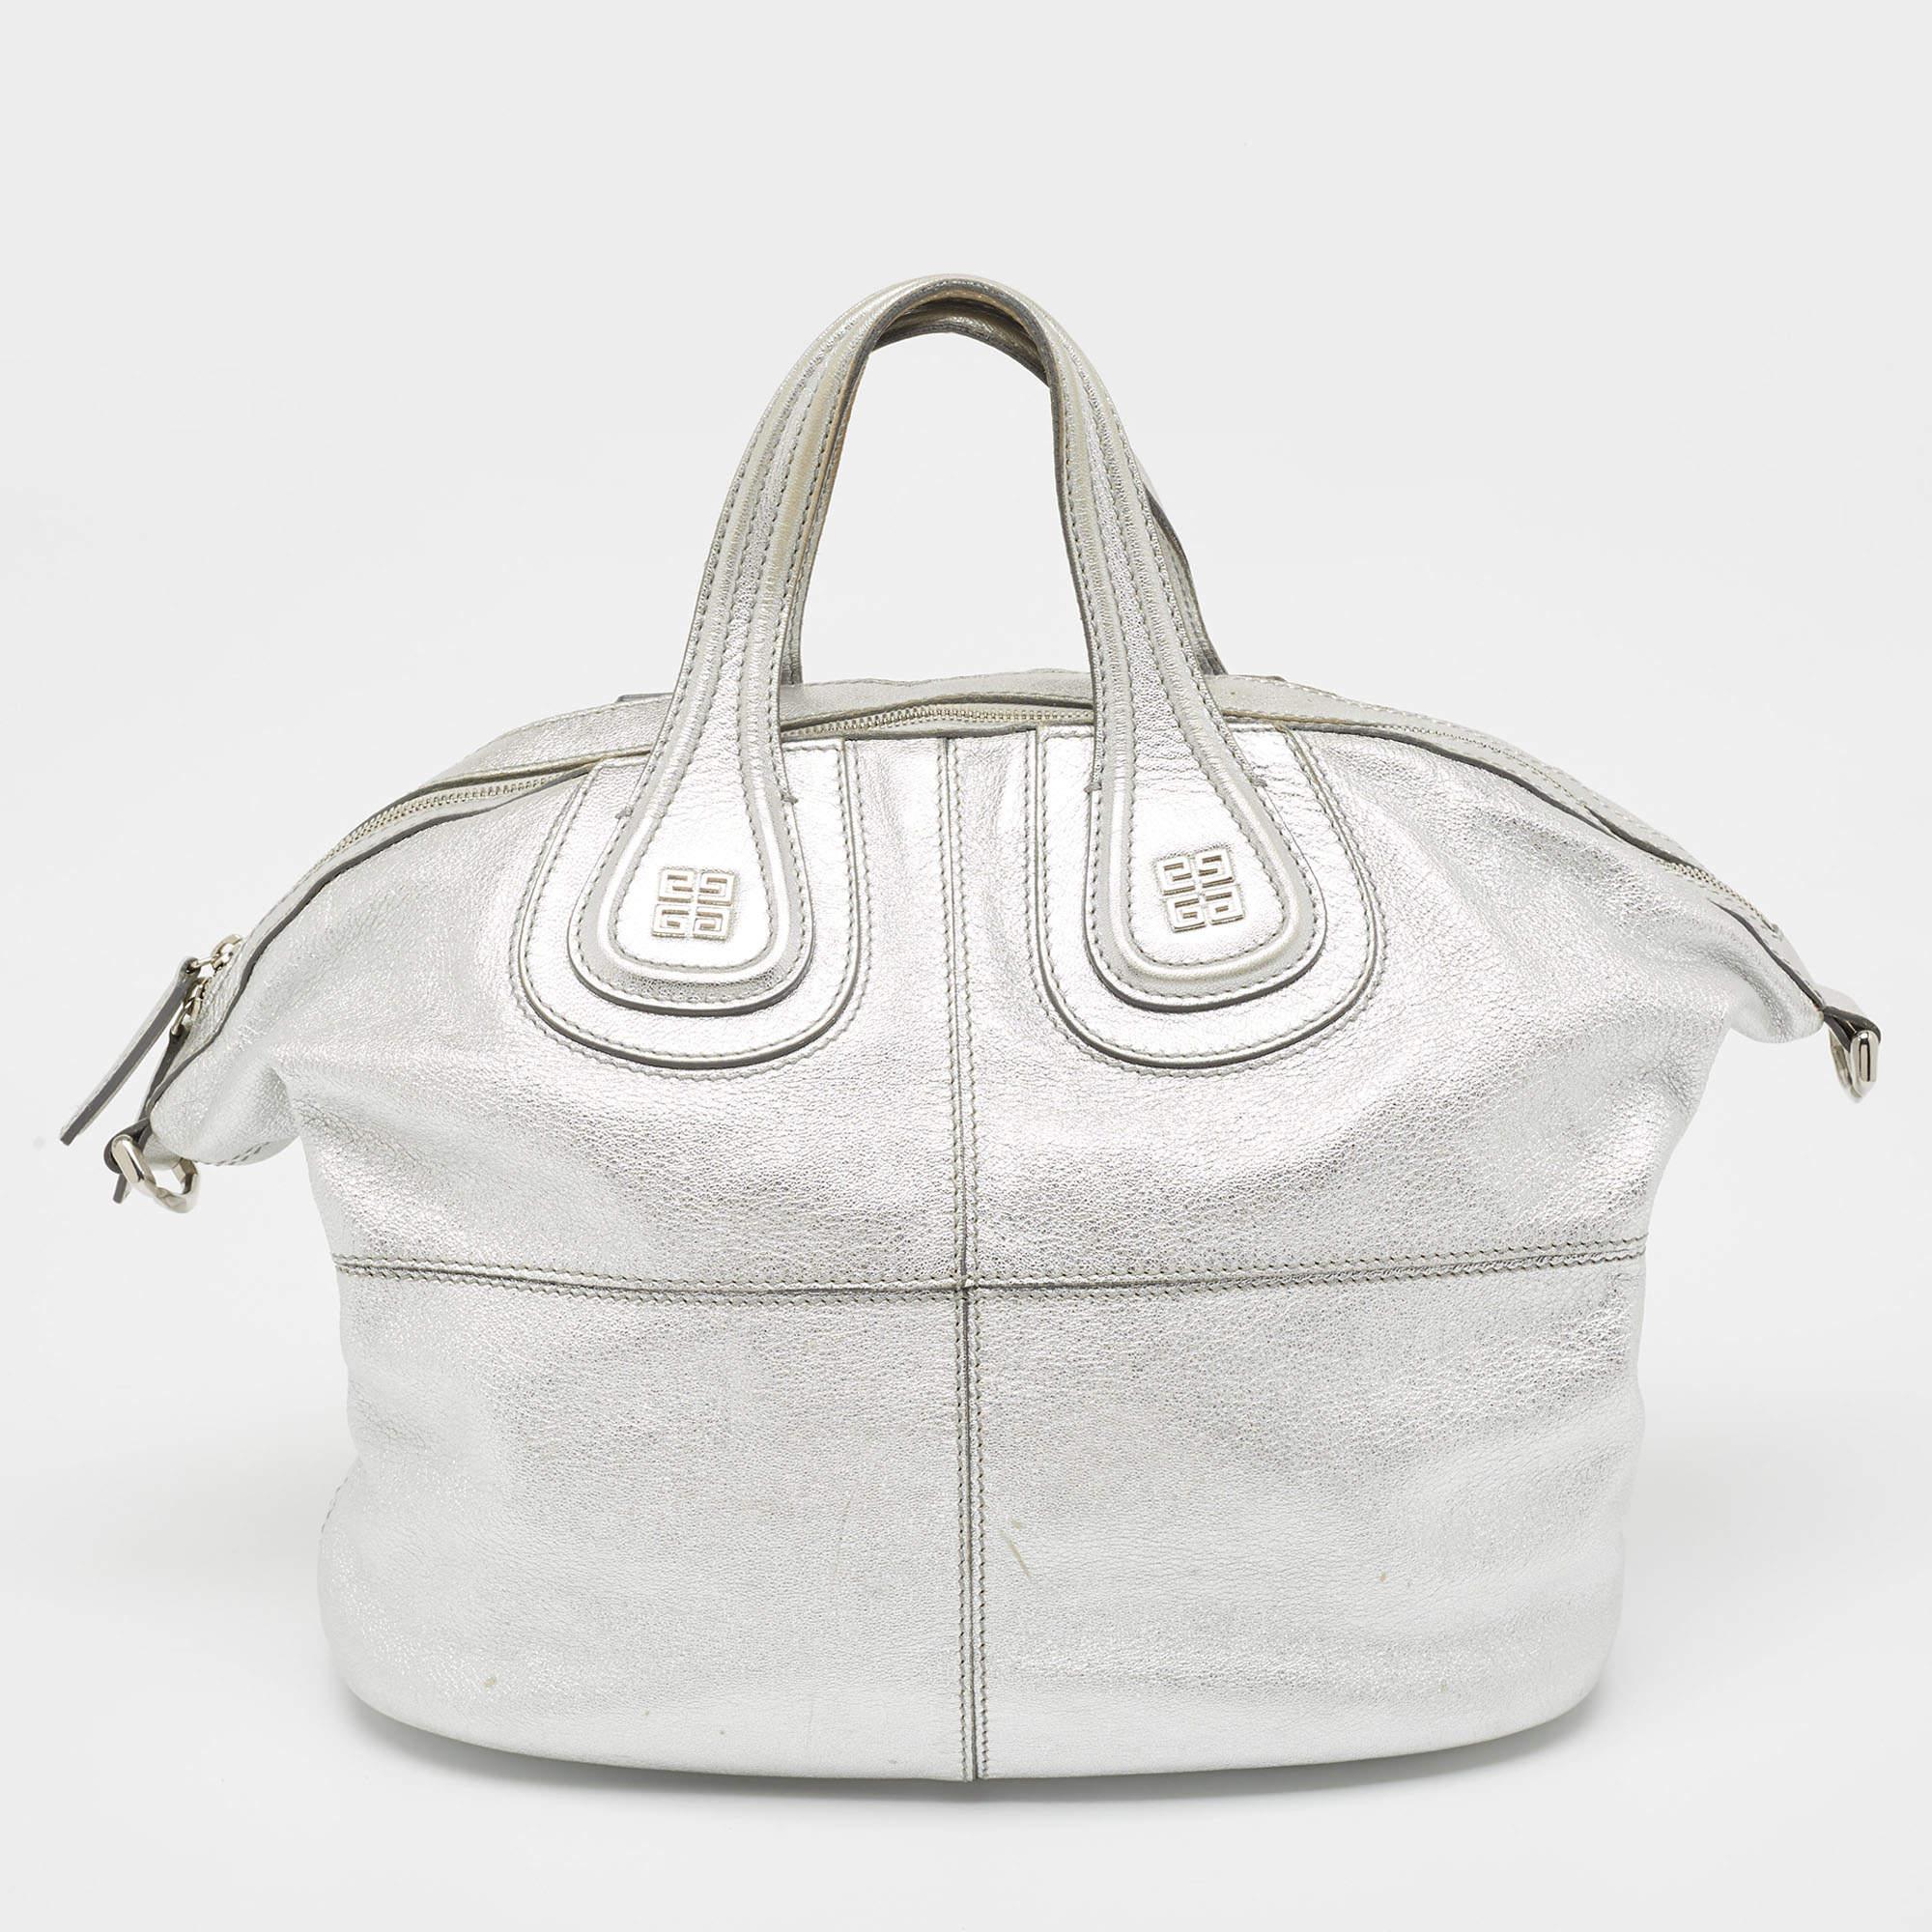 Givenchy Silver Leather Medium Nightingale Satchel For Sale 1